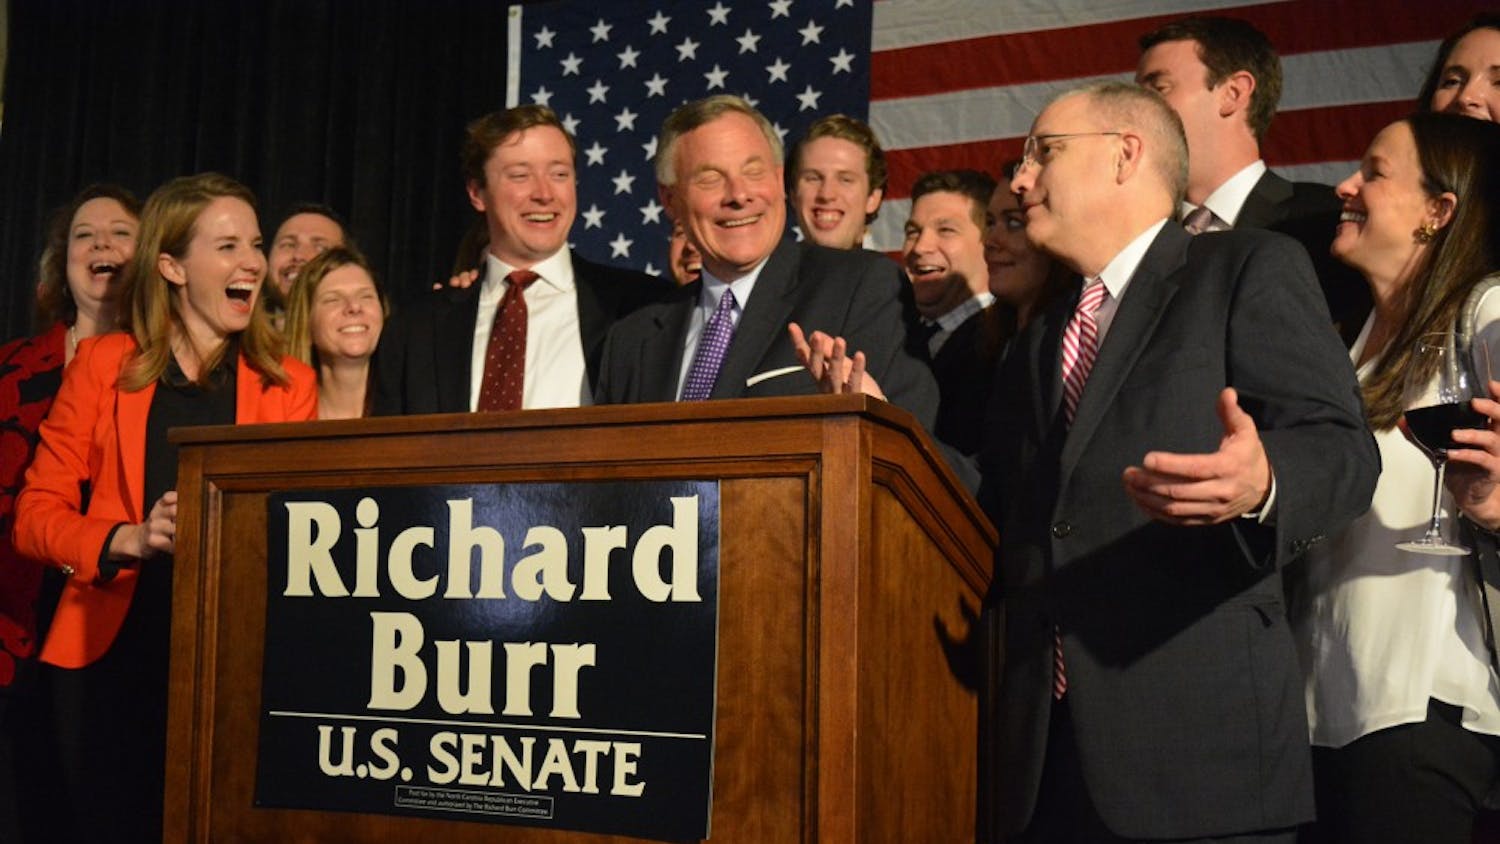 Richard Burr wins the North Carolina Senatorial Race. He held his election party at the Forsyth Country Club in Winston-Salem.